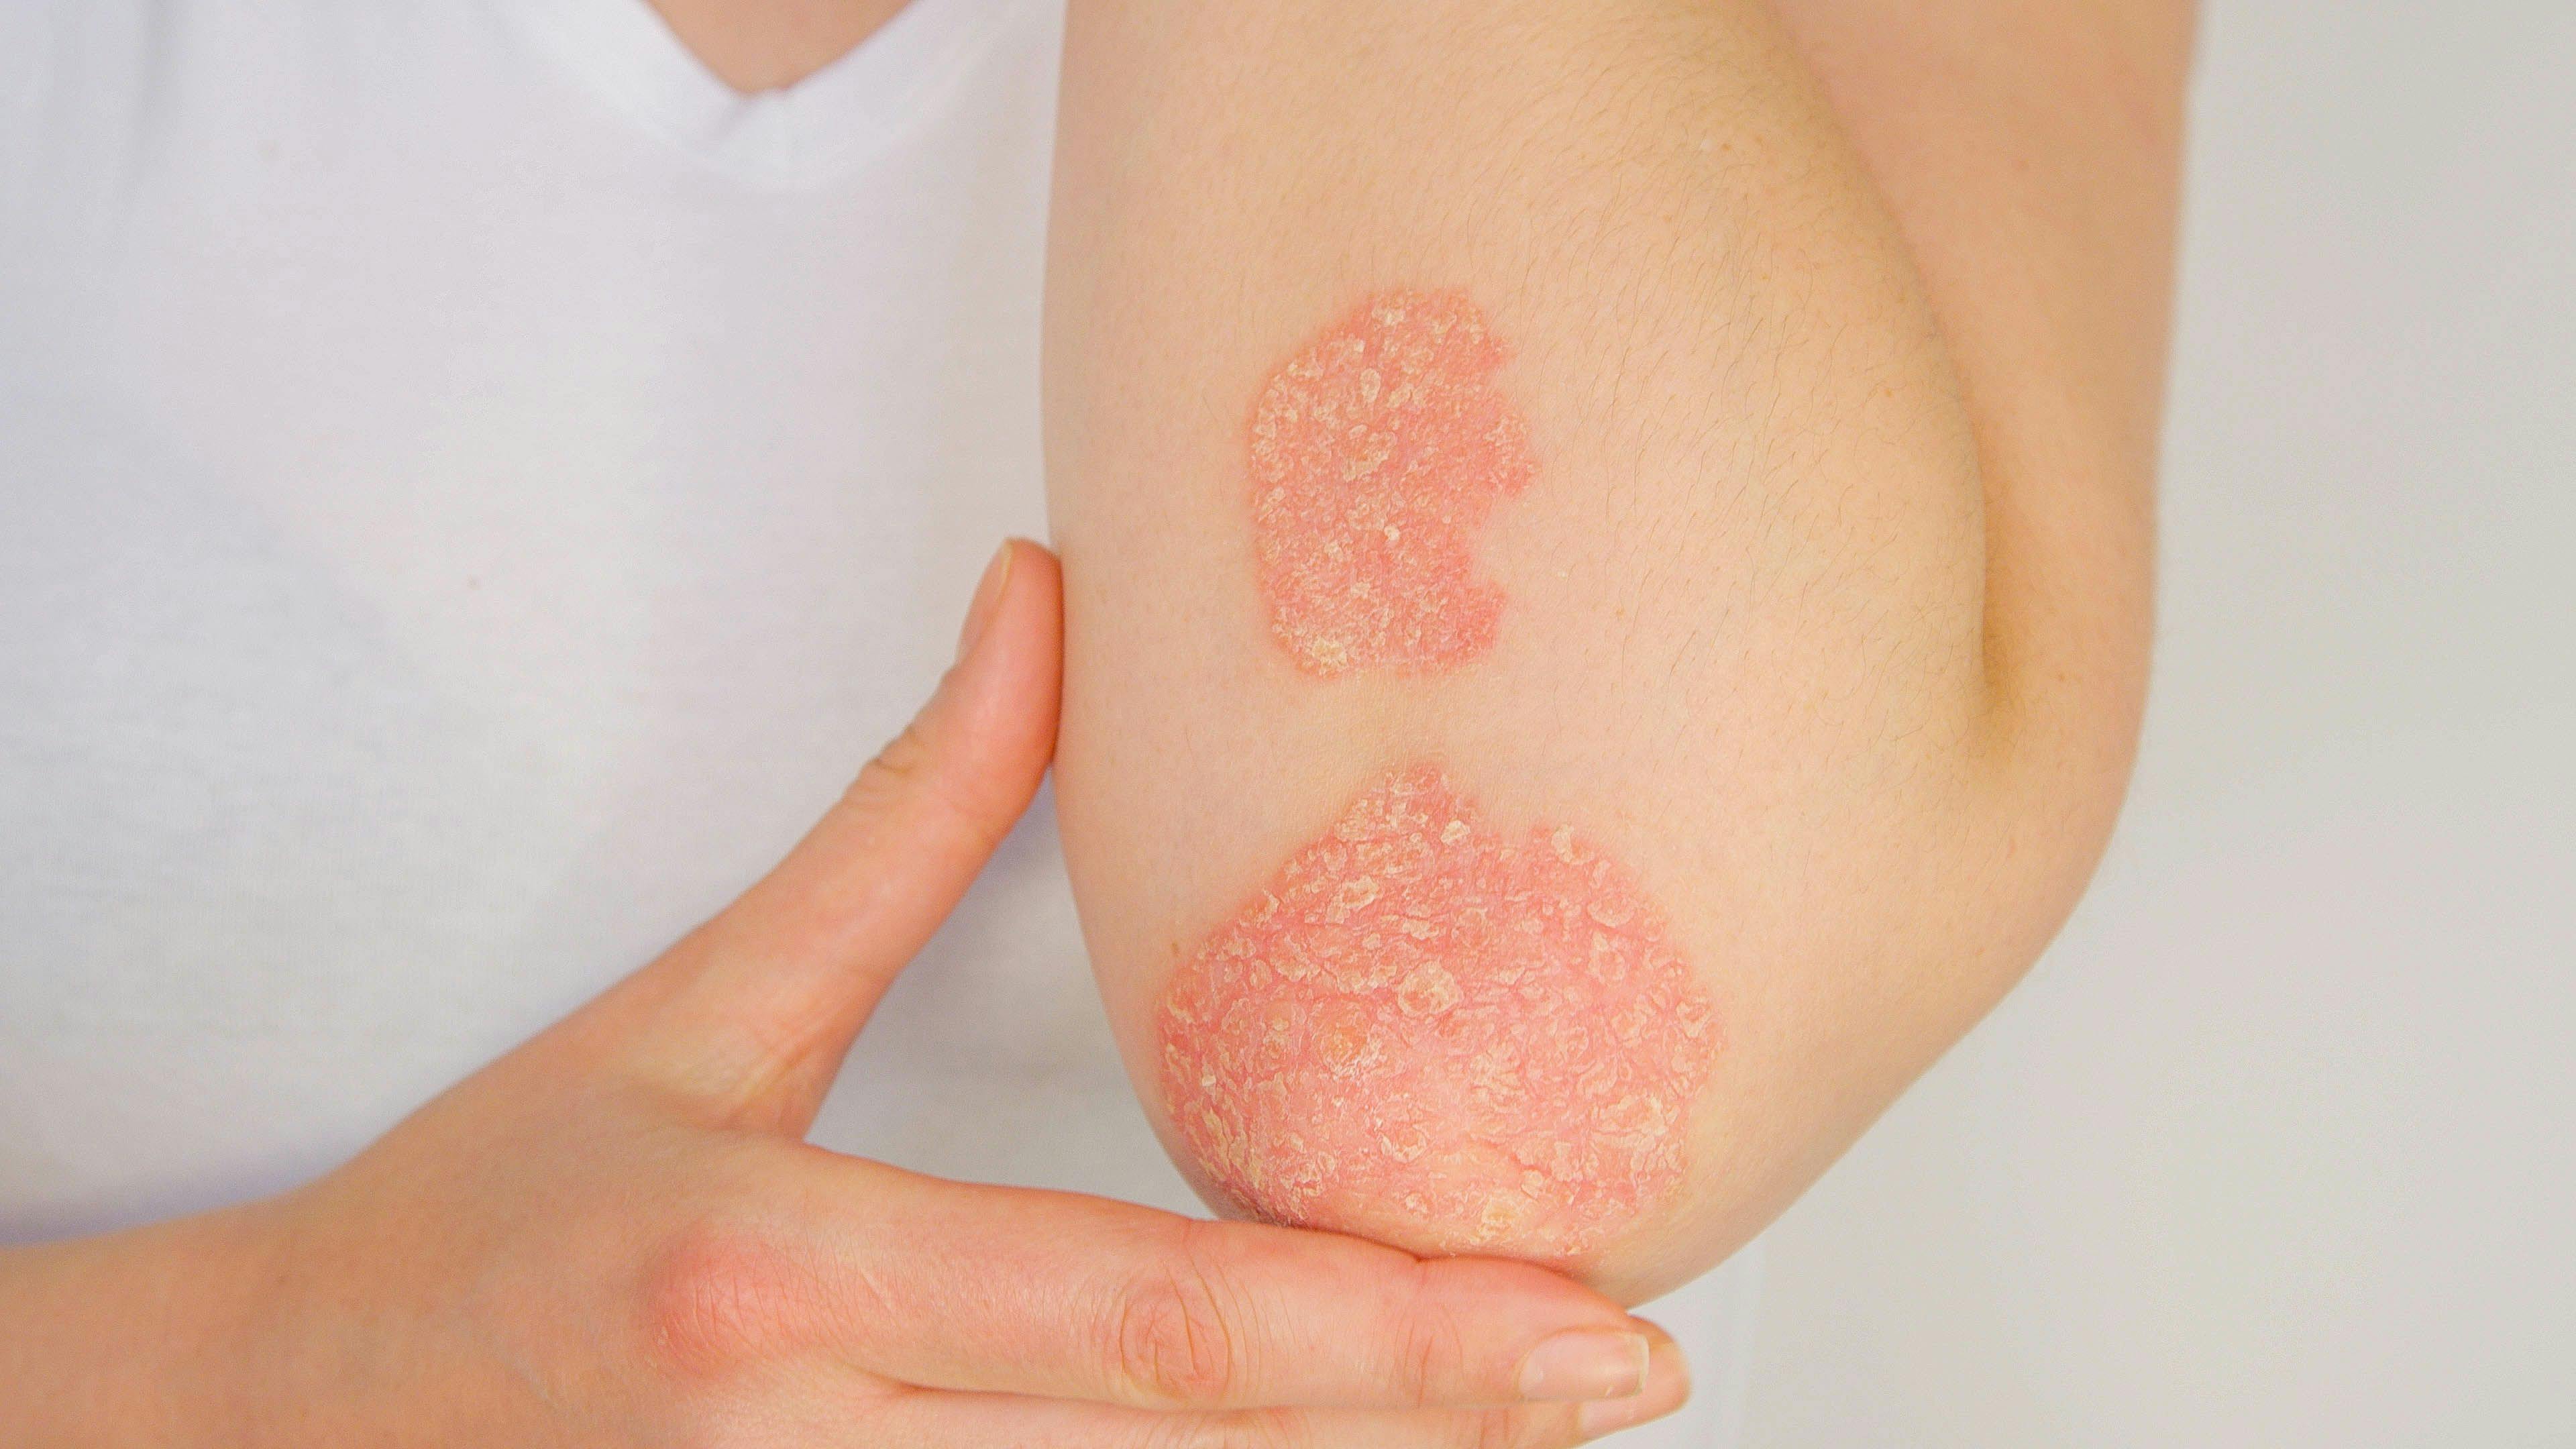 Systemic psoriasis therapies not age-dependent